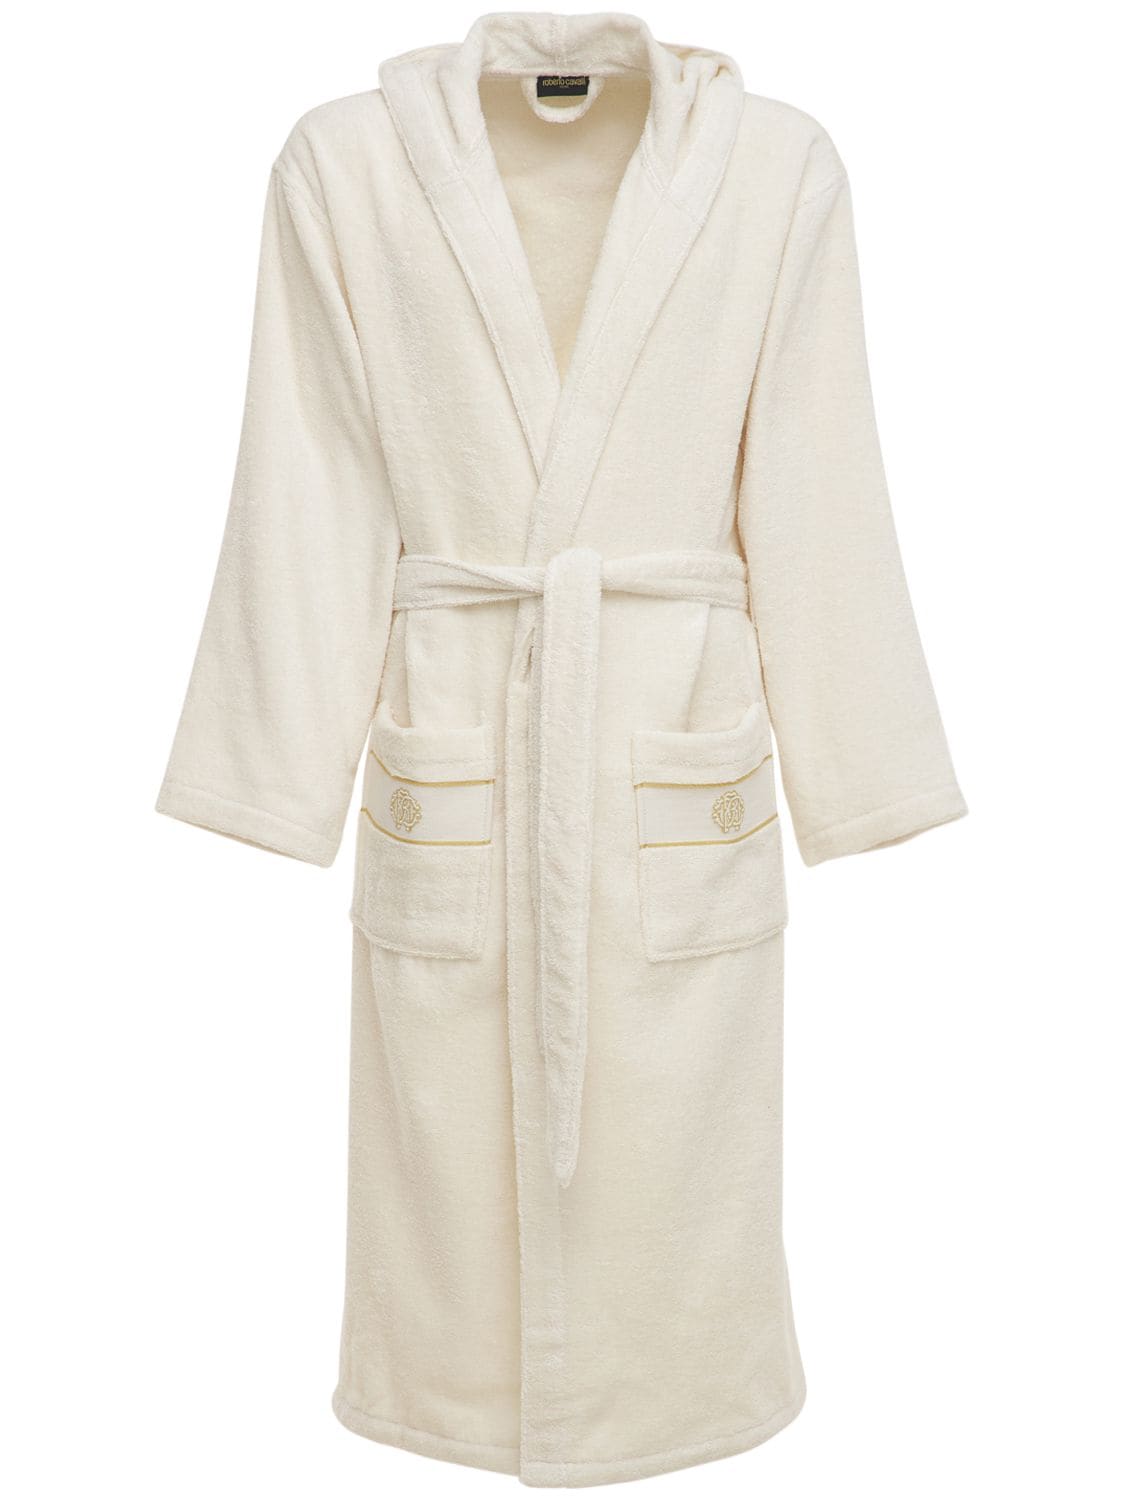 Image of Gold New Hooded Cotton Bathrobe